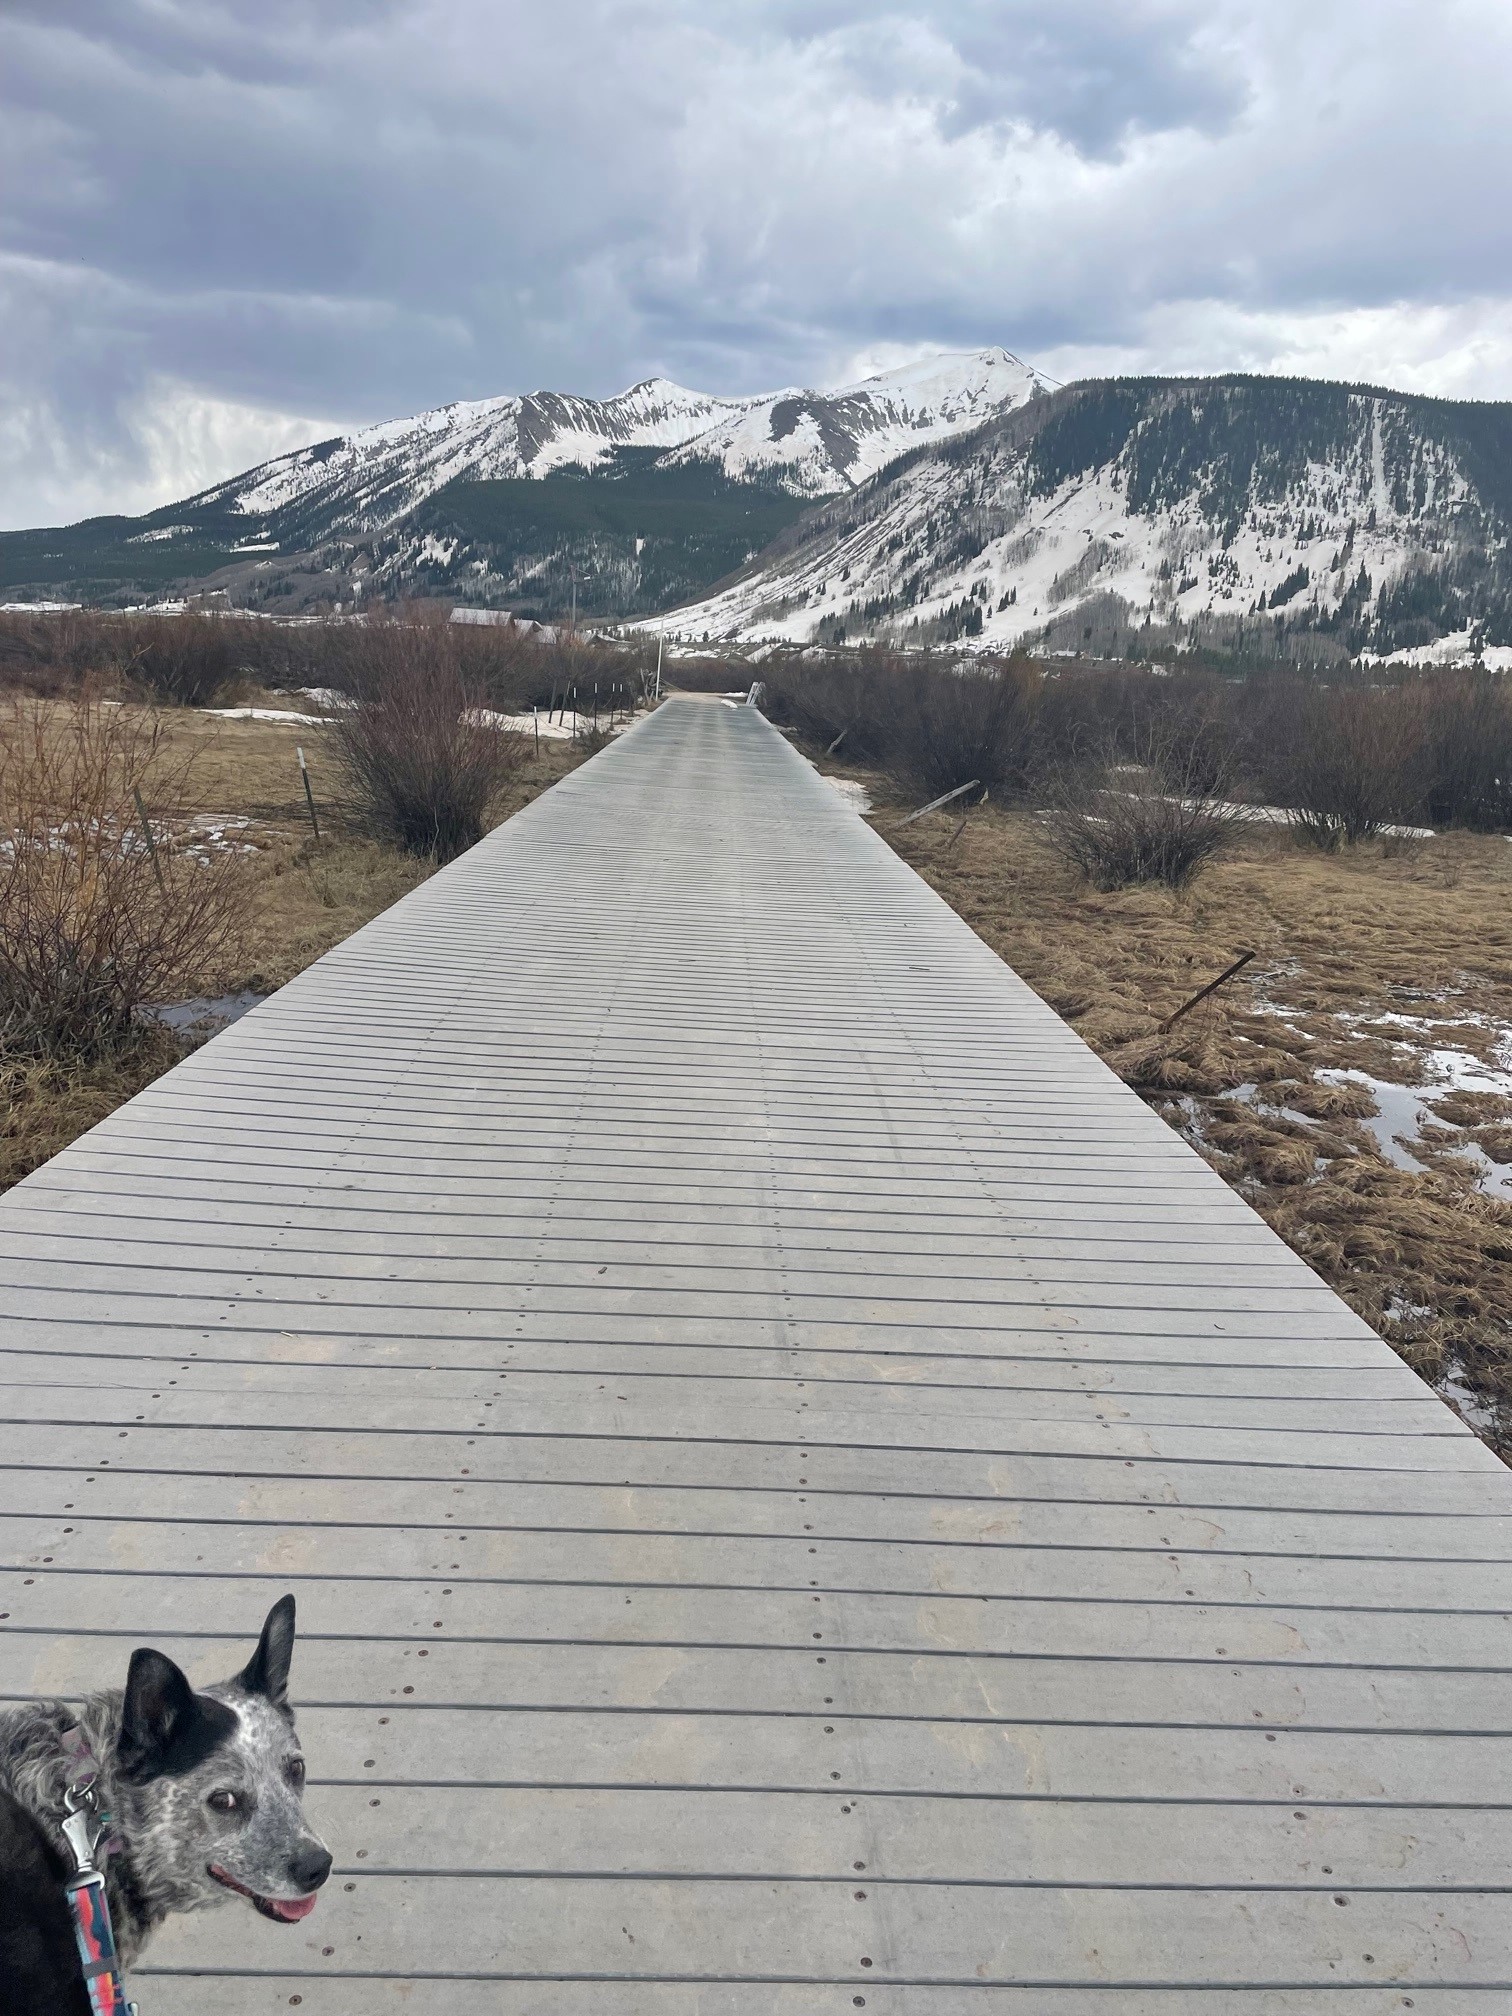 Picture of the boardwalk bridge along the recreation path between the towns of Crested Butte and Mt. Crested Butte. 